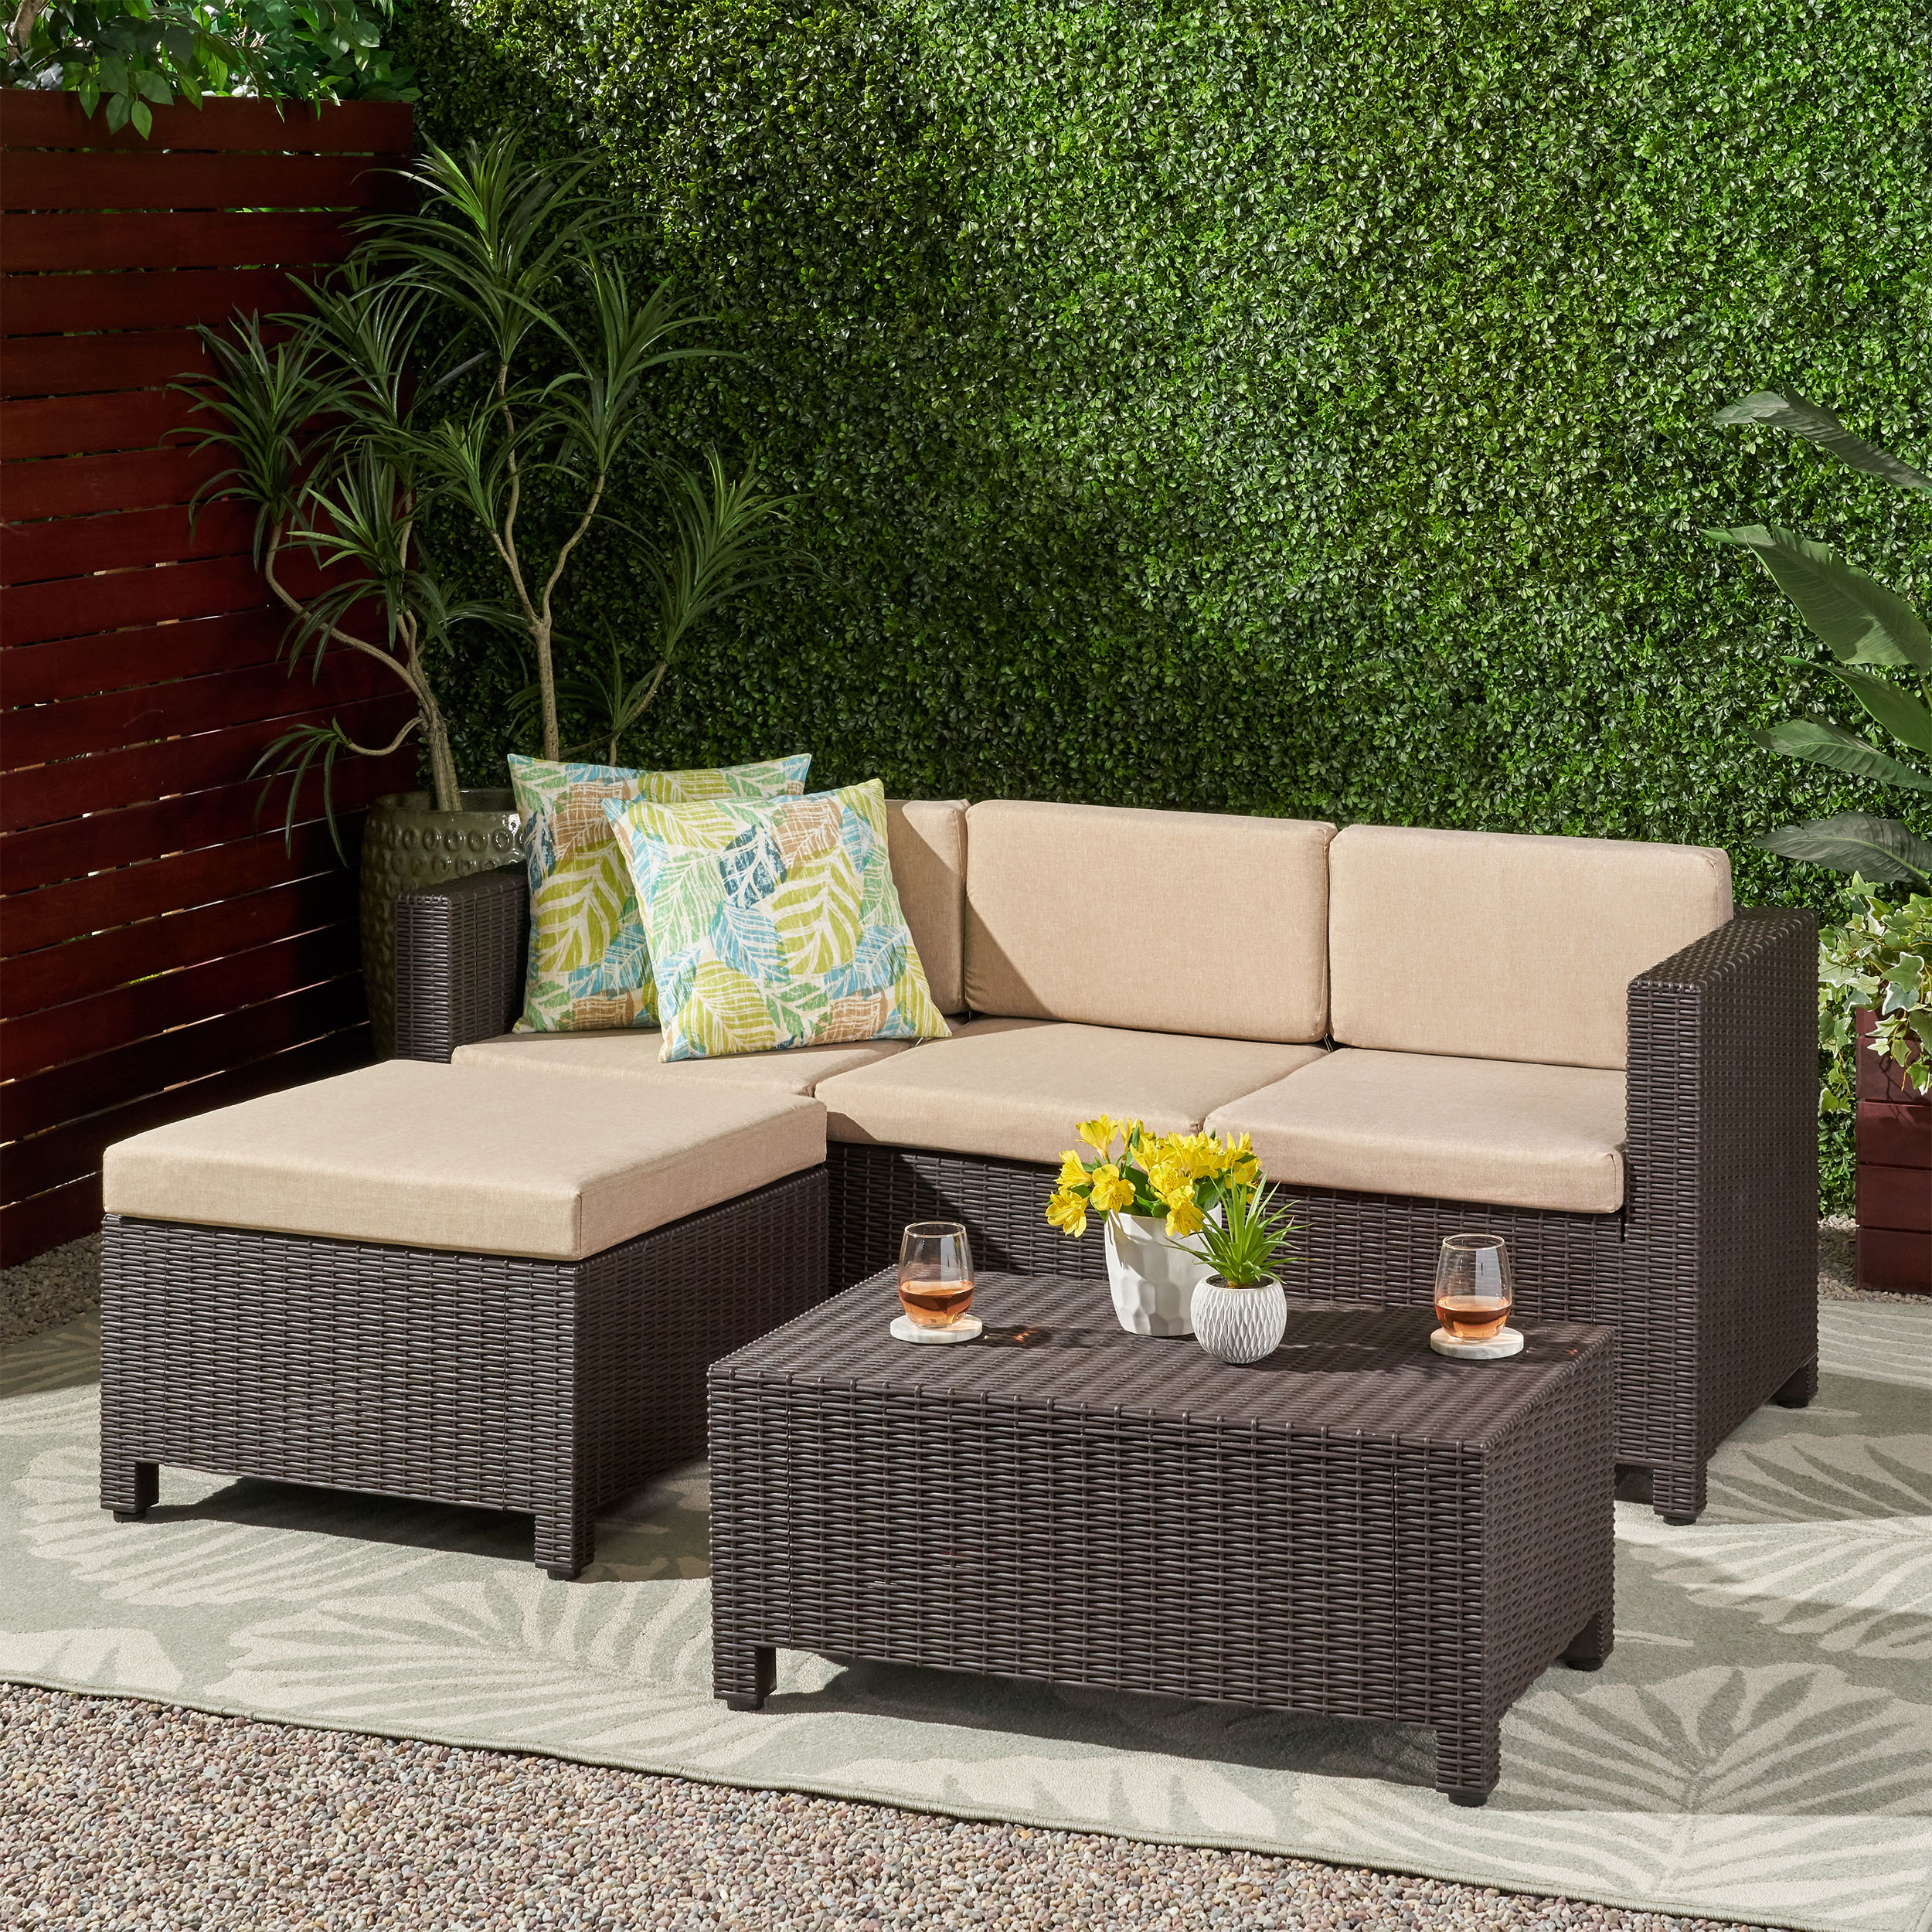 Small Sectional for the Yard